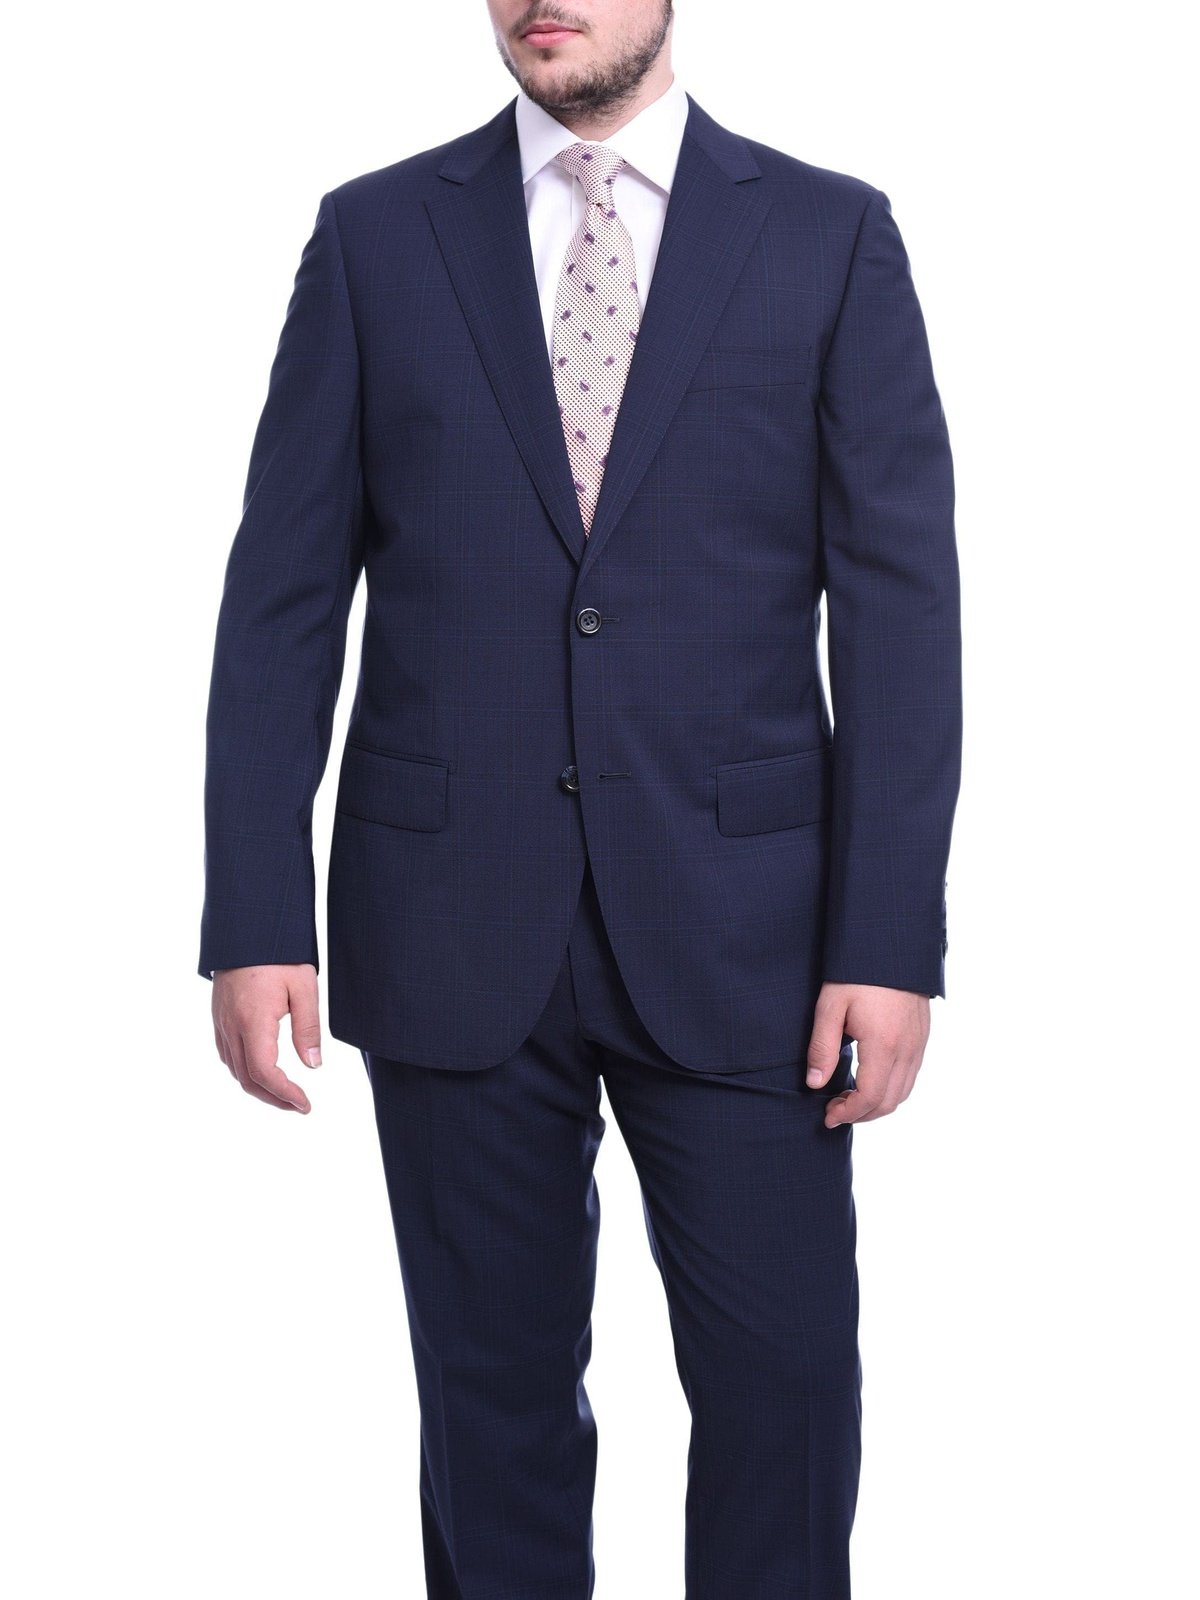 Napoli TWO PIECE SUITS Napoli Classic Fit Blue Plaid Windowpane Two Button Half Canvassed Wool Suit